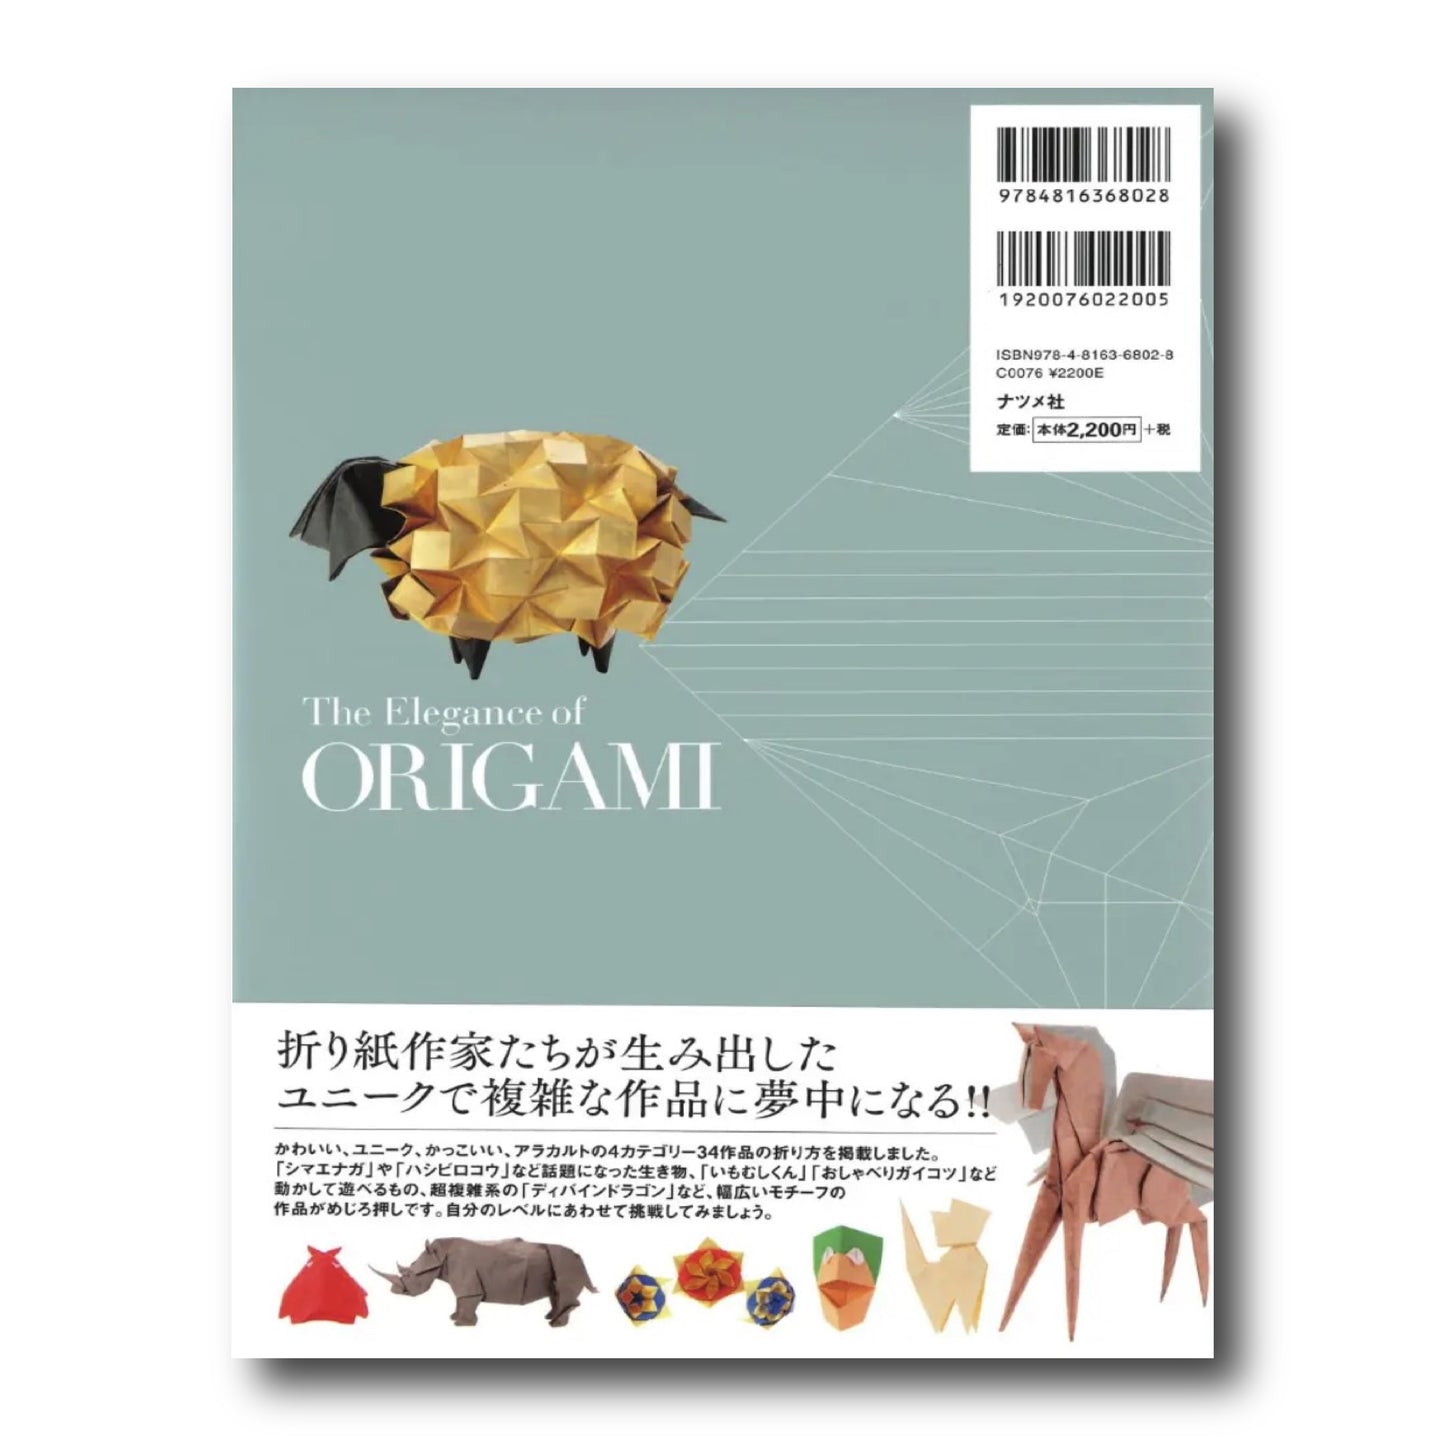 The Elegance of Origami (Japanese Edition)